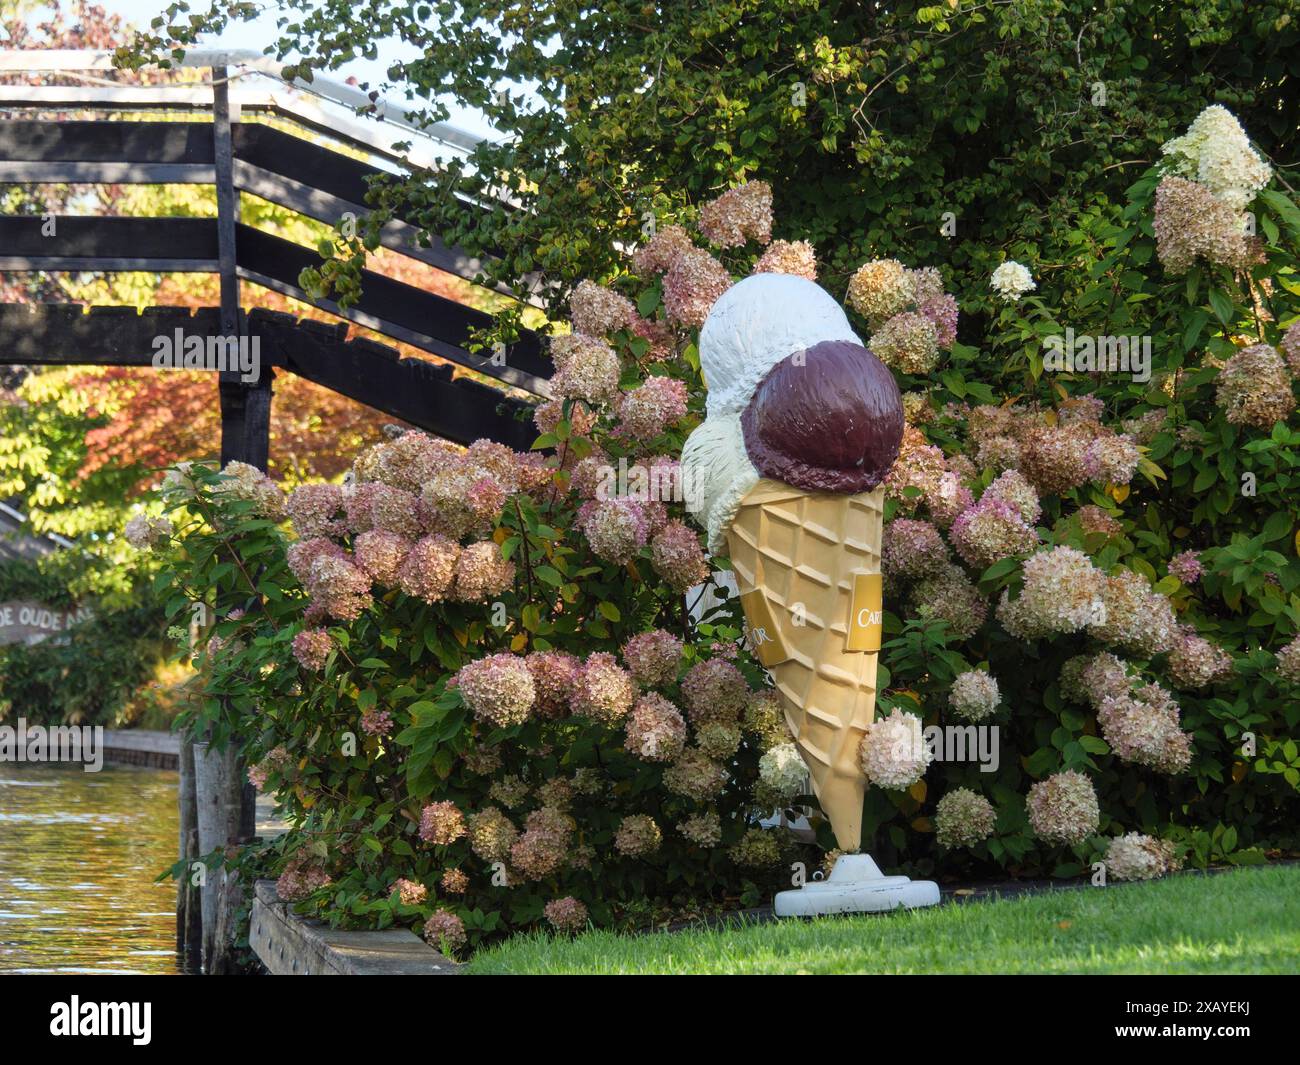 Large ice-cream cone decoration between hydrangea flowers on a canal next to a wooden bridge, giethoorn, Netherlands Stock Photo